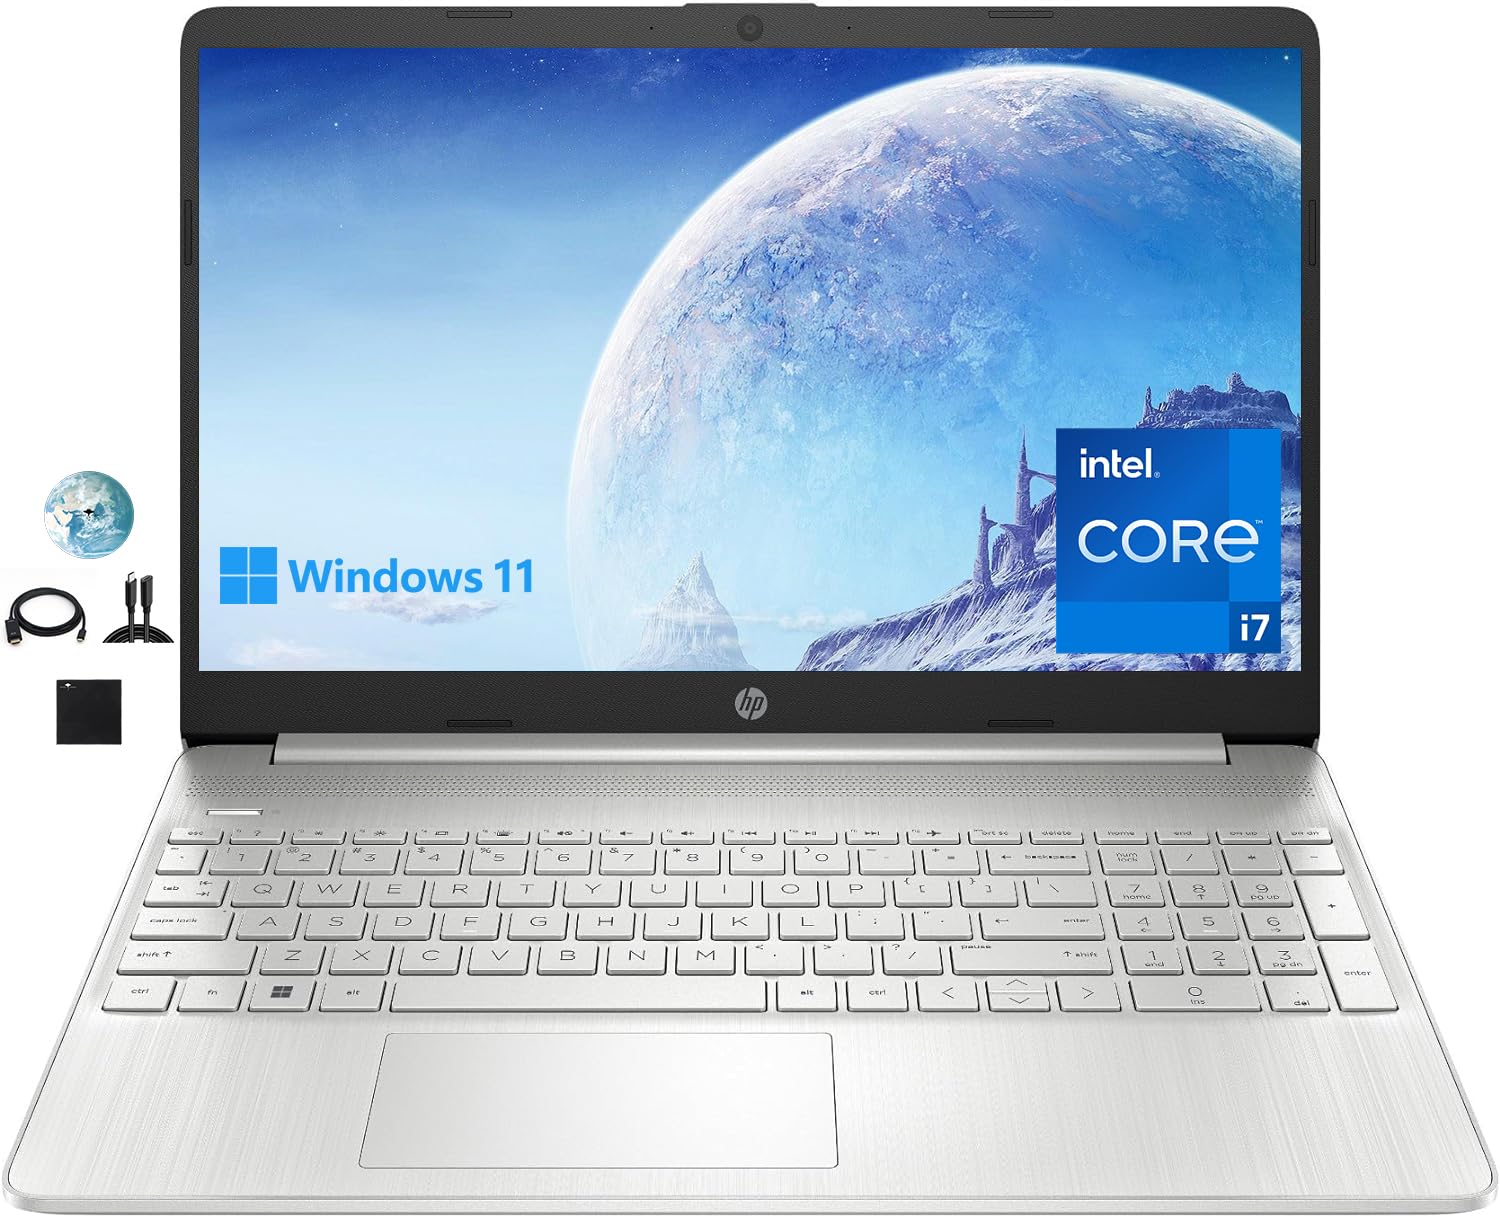 HP Newest Flagship 15.6 HD IPS Laptop for Business, Quad-Core i7-1165G7(Up to 4.7GHz), 32GB RAM, 1TB PCIe SSD, Iris Xe Graphics, NumPad, Webcam, HDMI, WiFi, Bluetooth, Windows 11, GM Accessories